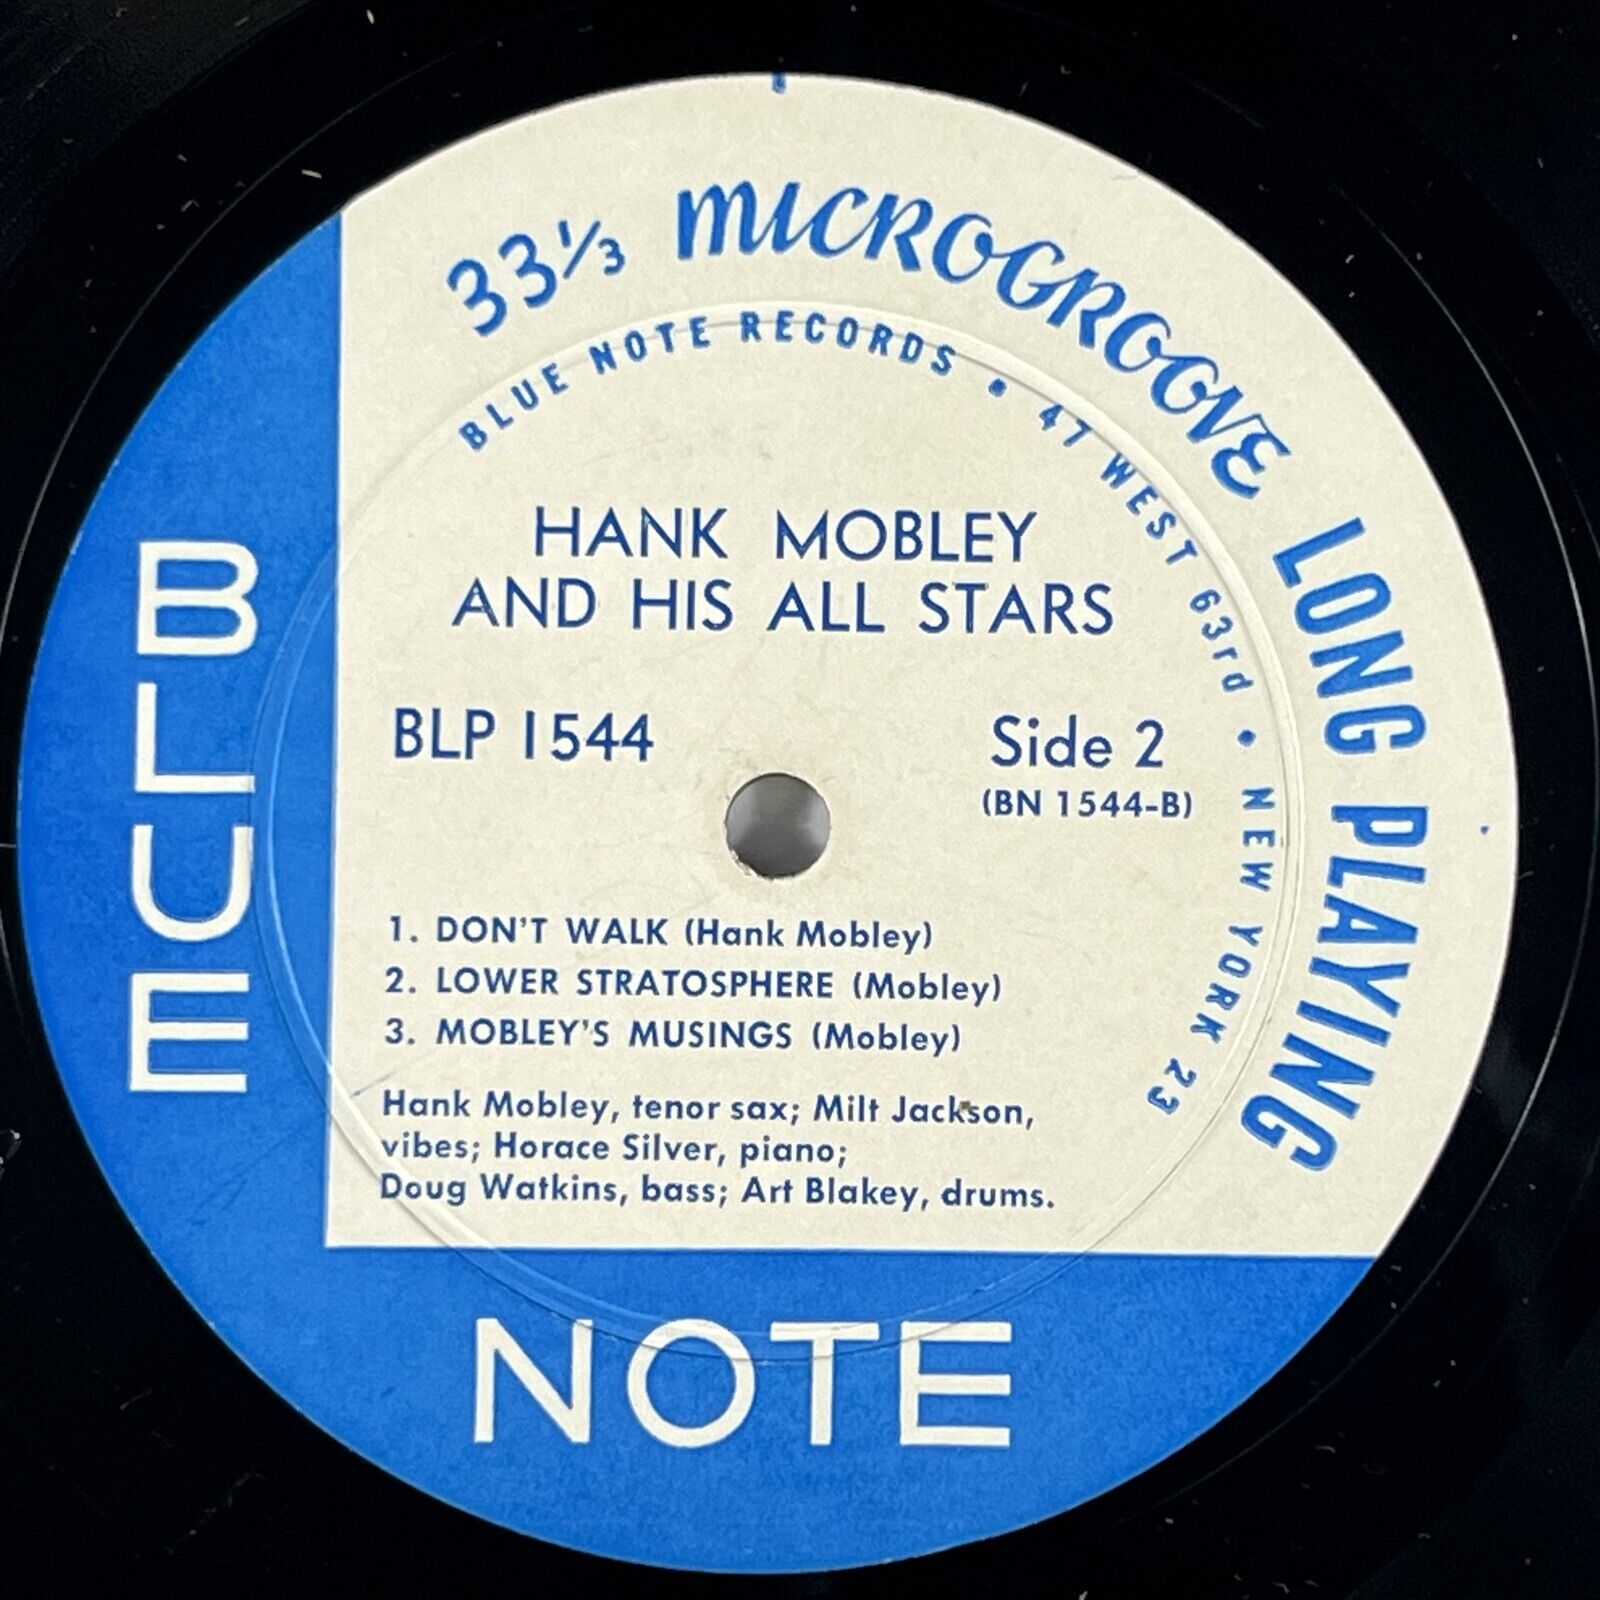 Pic 3 HANK MOBLEY & His All Stars Blue Note 1544 RVG EAR 9M DG 63rd St. Flat VG+ LP